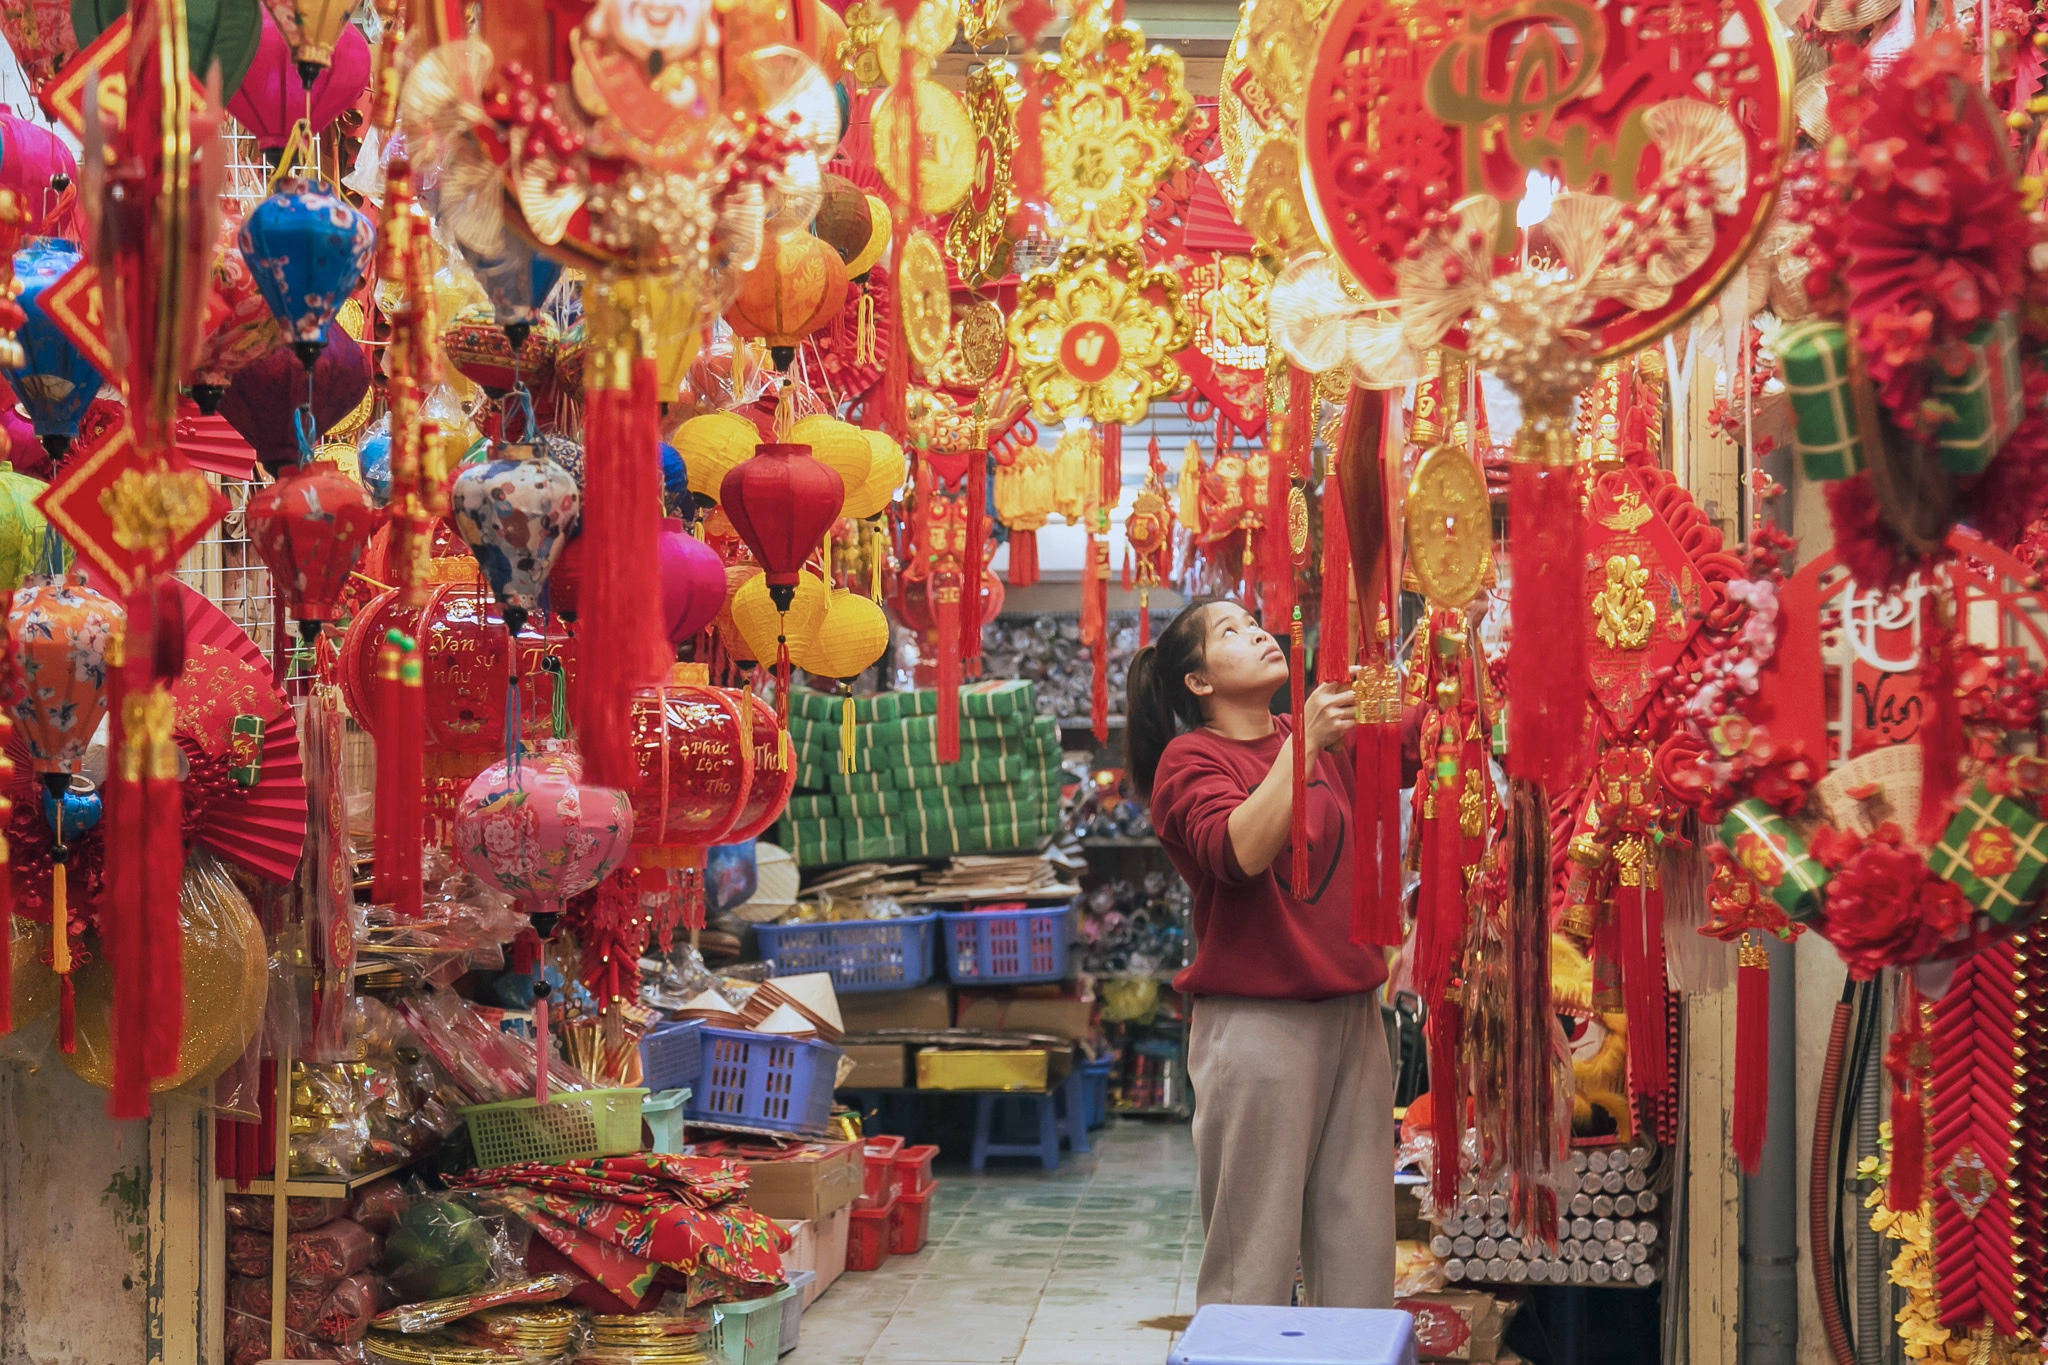 A shop selling Tet decorations in Hanoi. Photo: Lee Hyo-seung